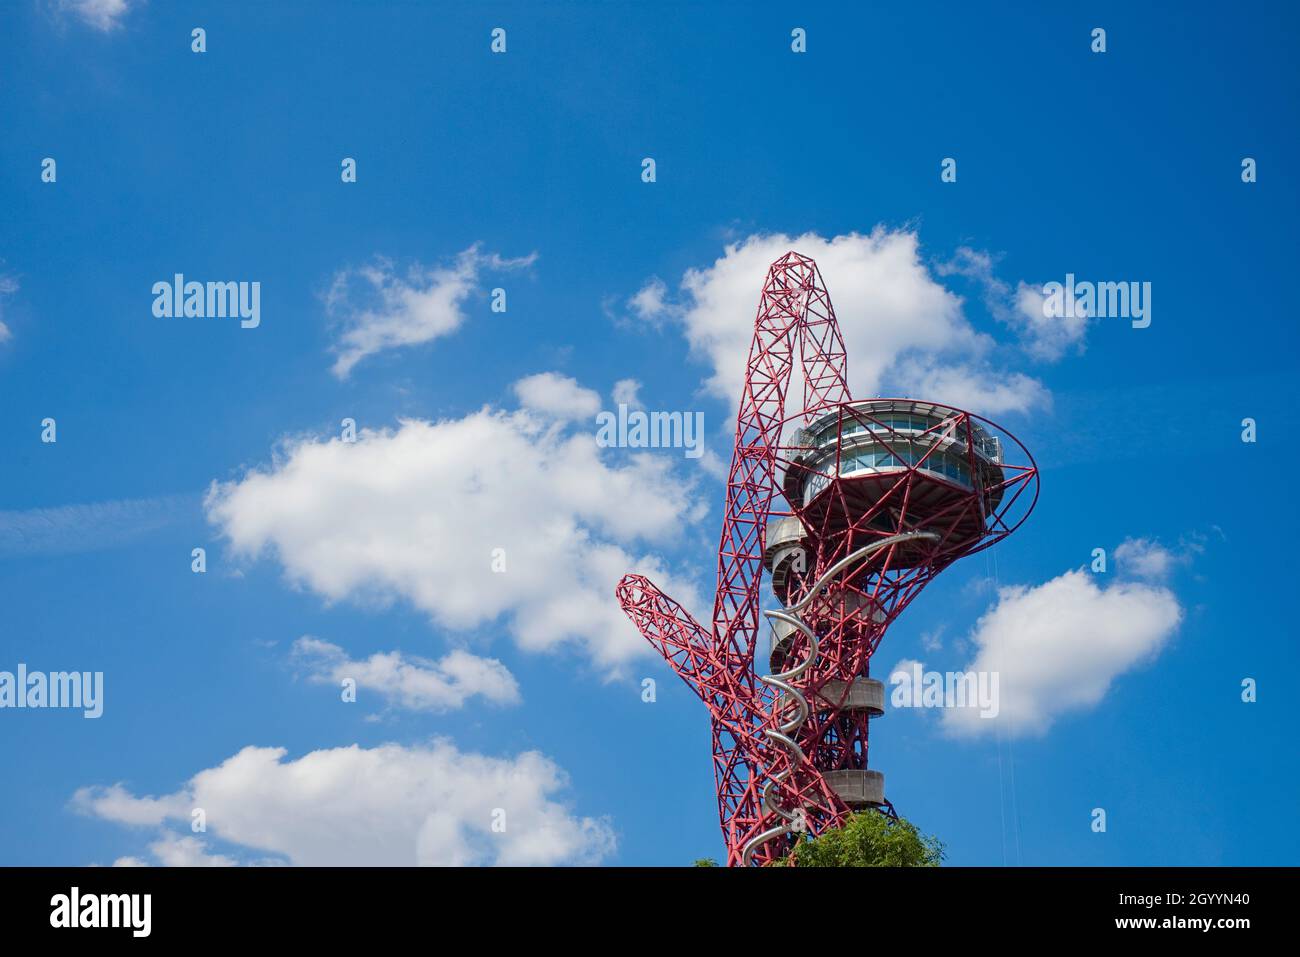 The ArcelorMittal Orbit is a 114.5-metre-high sculpture and observation tower in the Queen Elizabeth Olympic Park in Stratford, London. Stock Photo